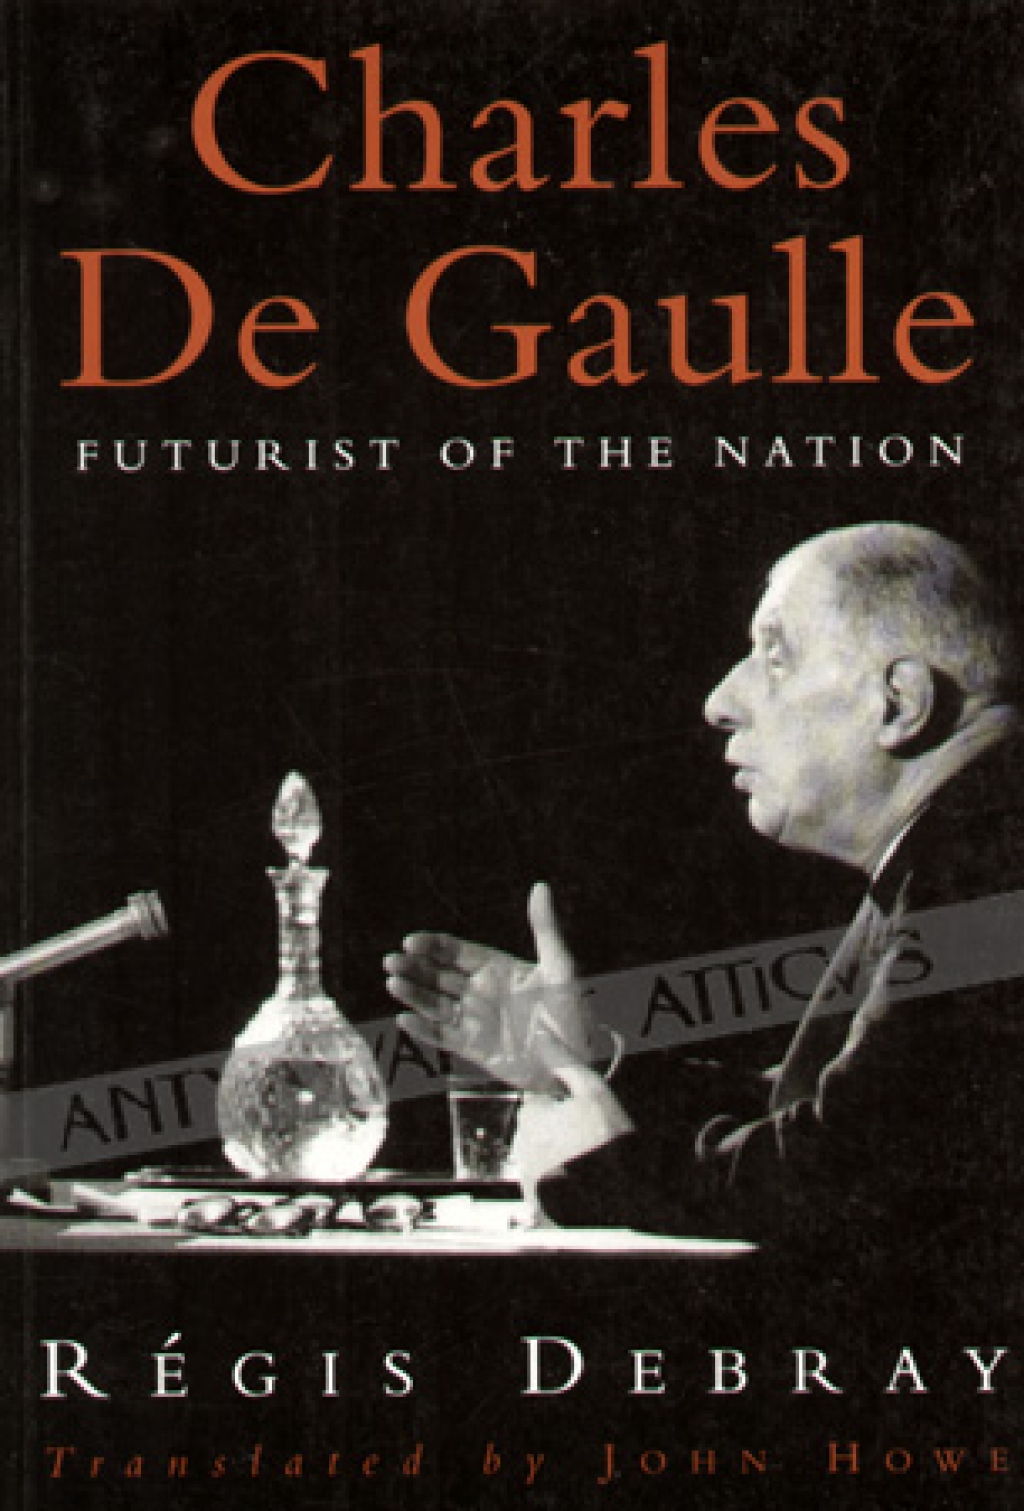 Charles de Gaulle. Futurist of the Nation